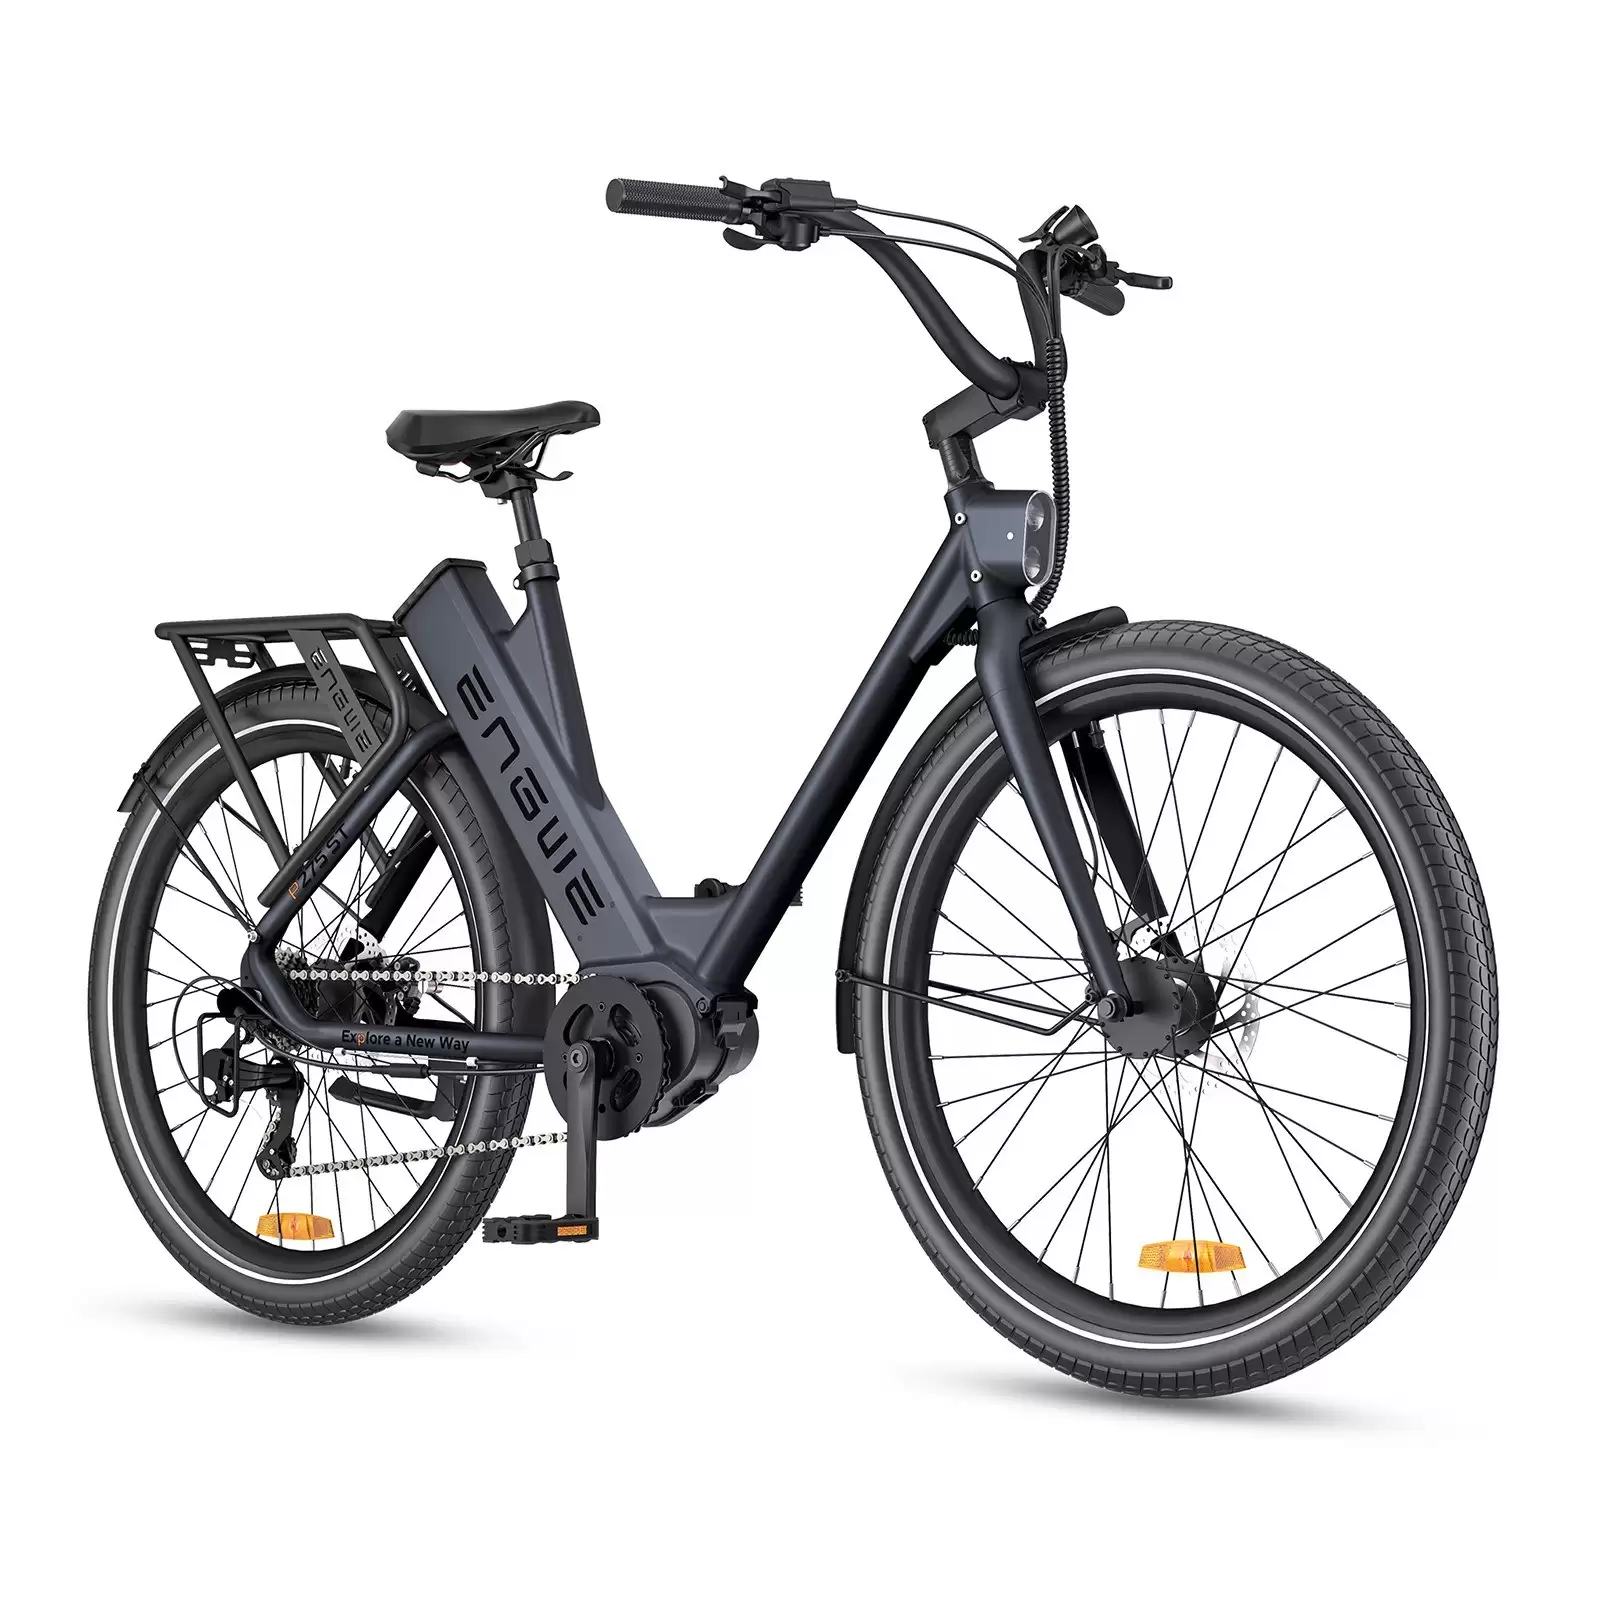 Order In Just $1429 Engwe P275 St 27.5 Inch Tire Long Range City Bike 250w With This Discount Coupon At Tomtop